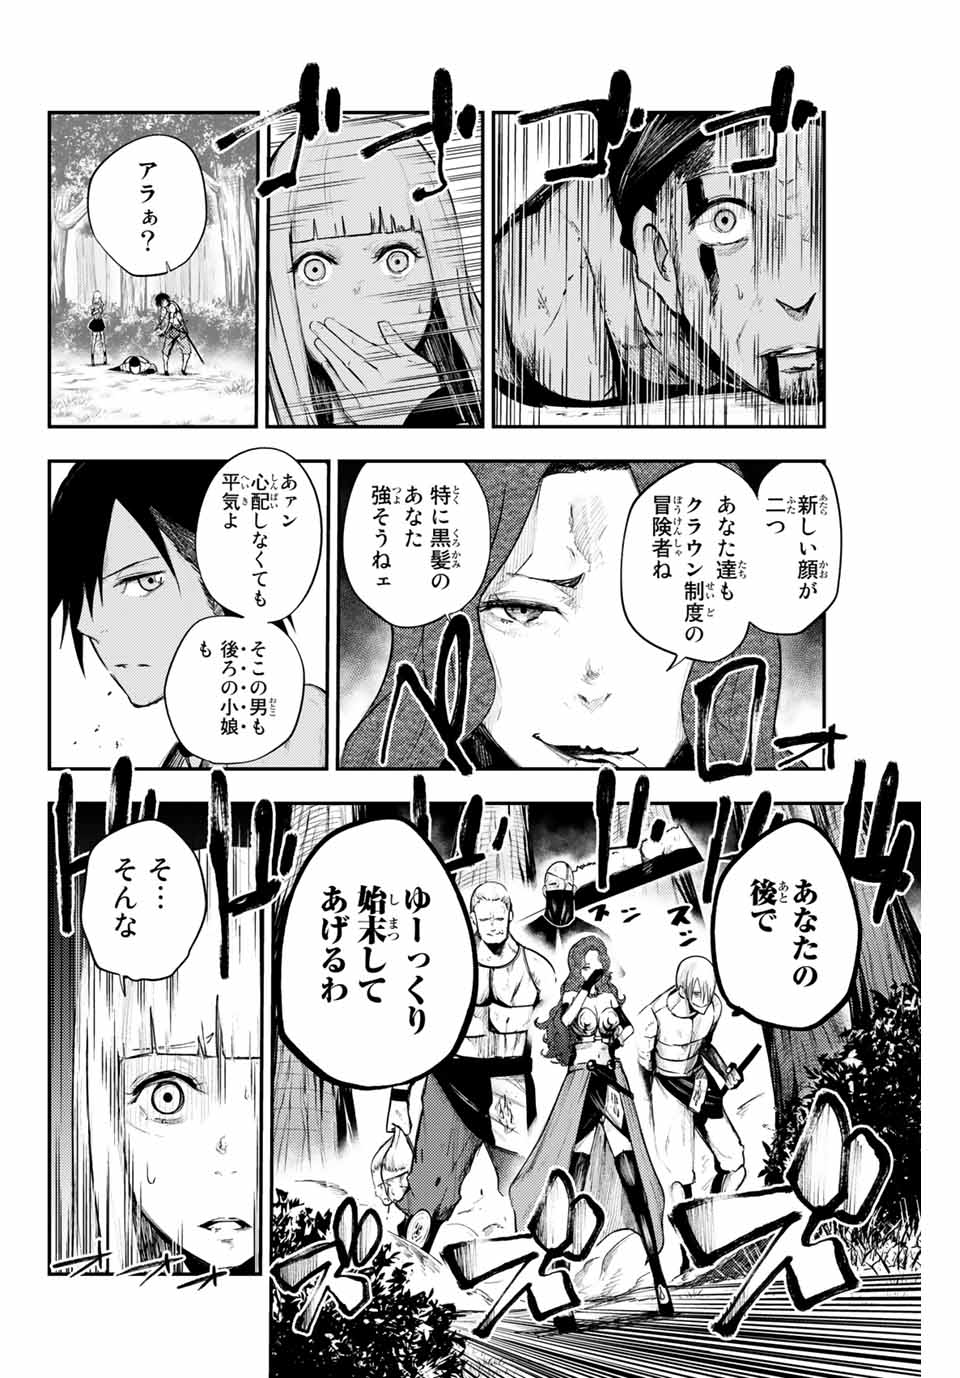 the strongest former prince-; 奴隷転生 ～その奴隷、最強の元王子につき～ 第6話 - Page 16